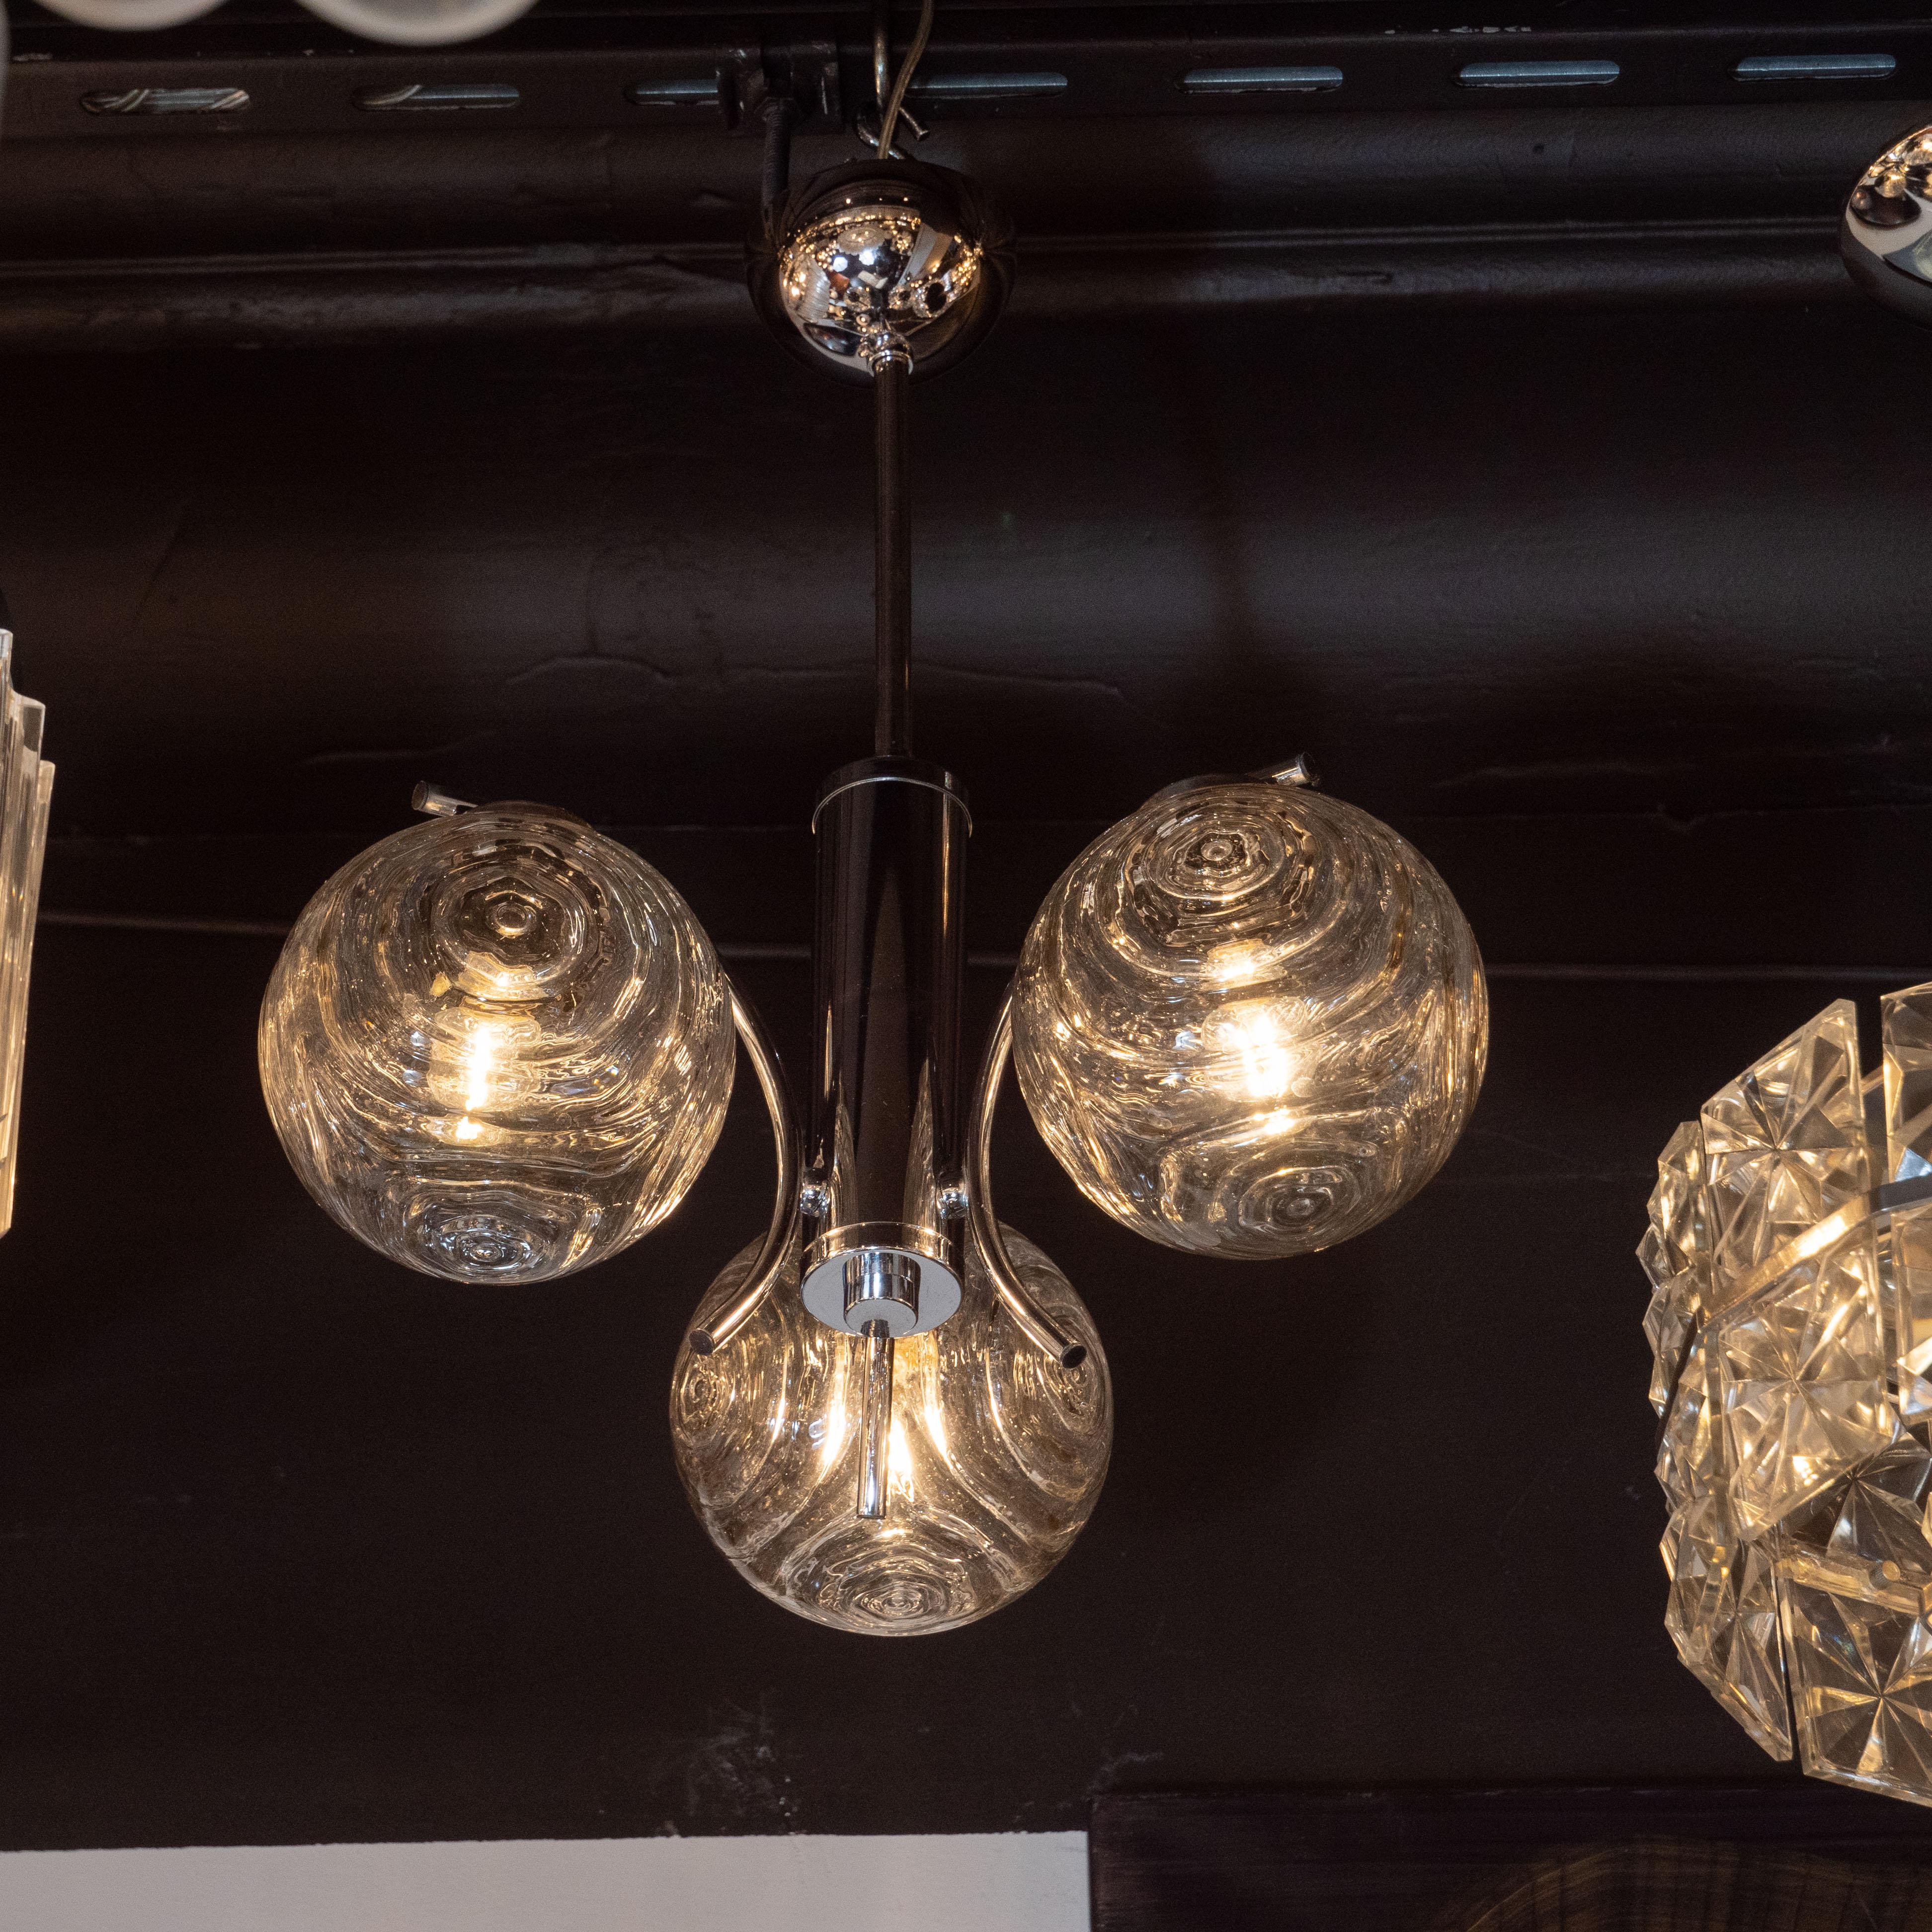 This elegant and understated Mid-Century Modern chandelier was realized in Germany, circa 1970. It features three subtly smoked translucent orbs with a concentric curvilinear pattern resembling ripples on the surface of water. Three curved arms